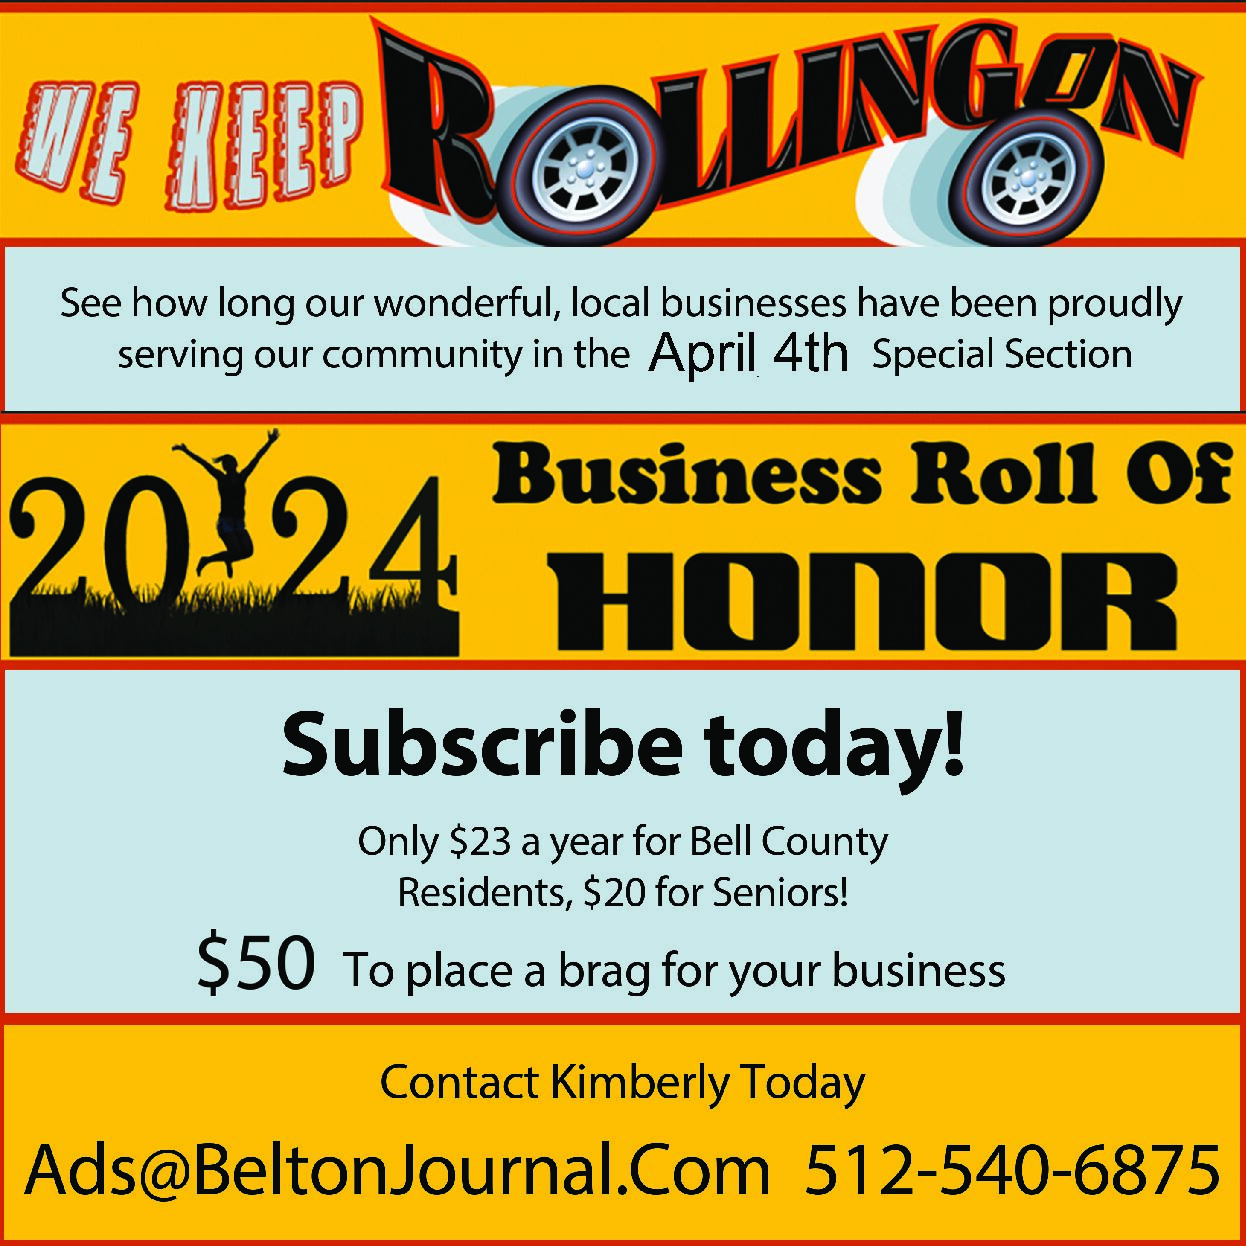 Image of Keep it Rolling - an upcoming special section of the Belton Journal